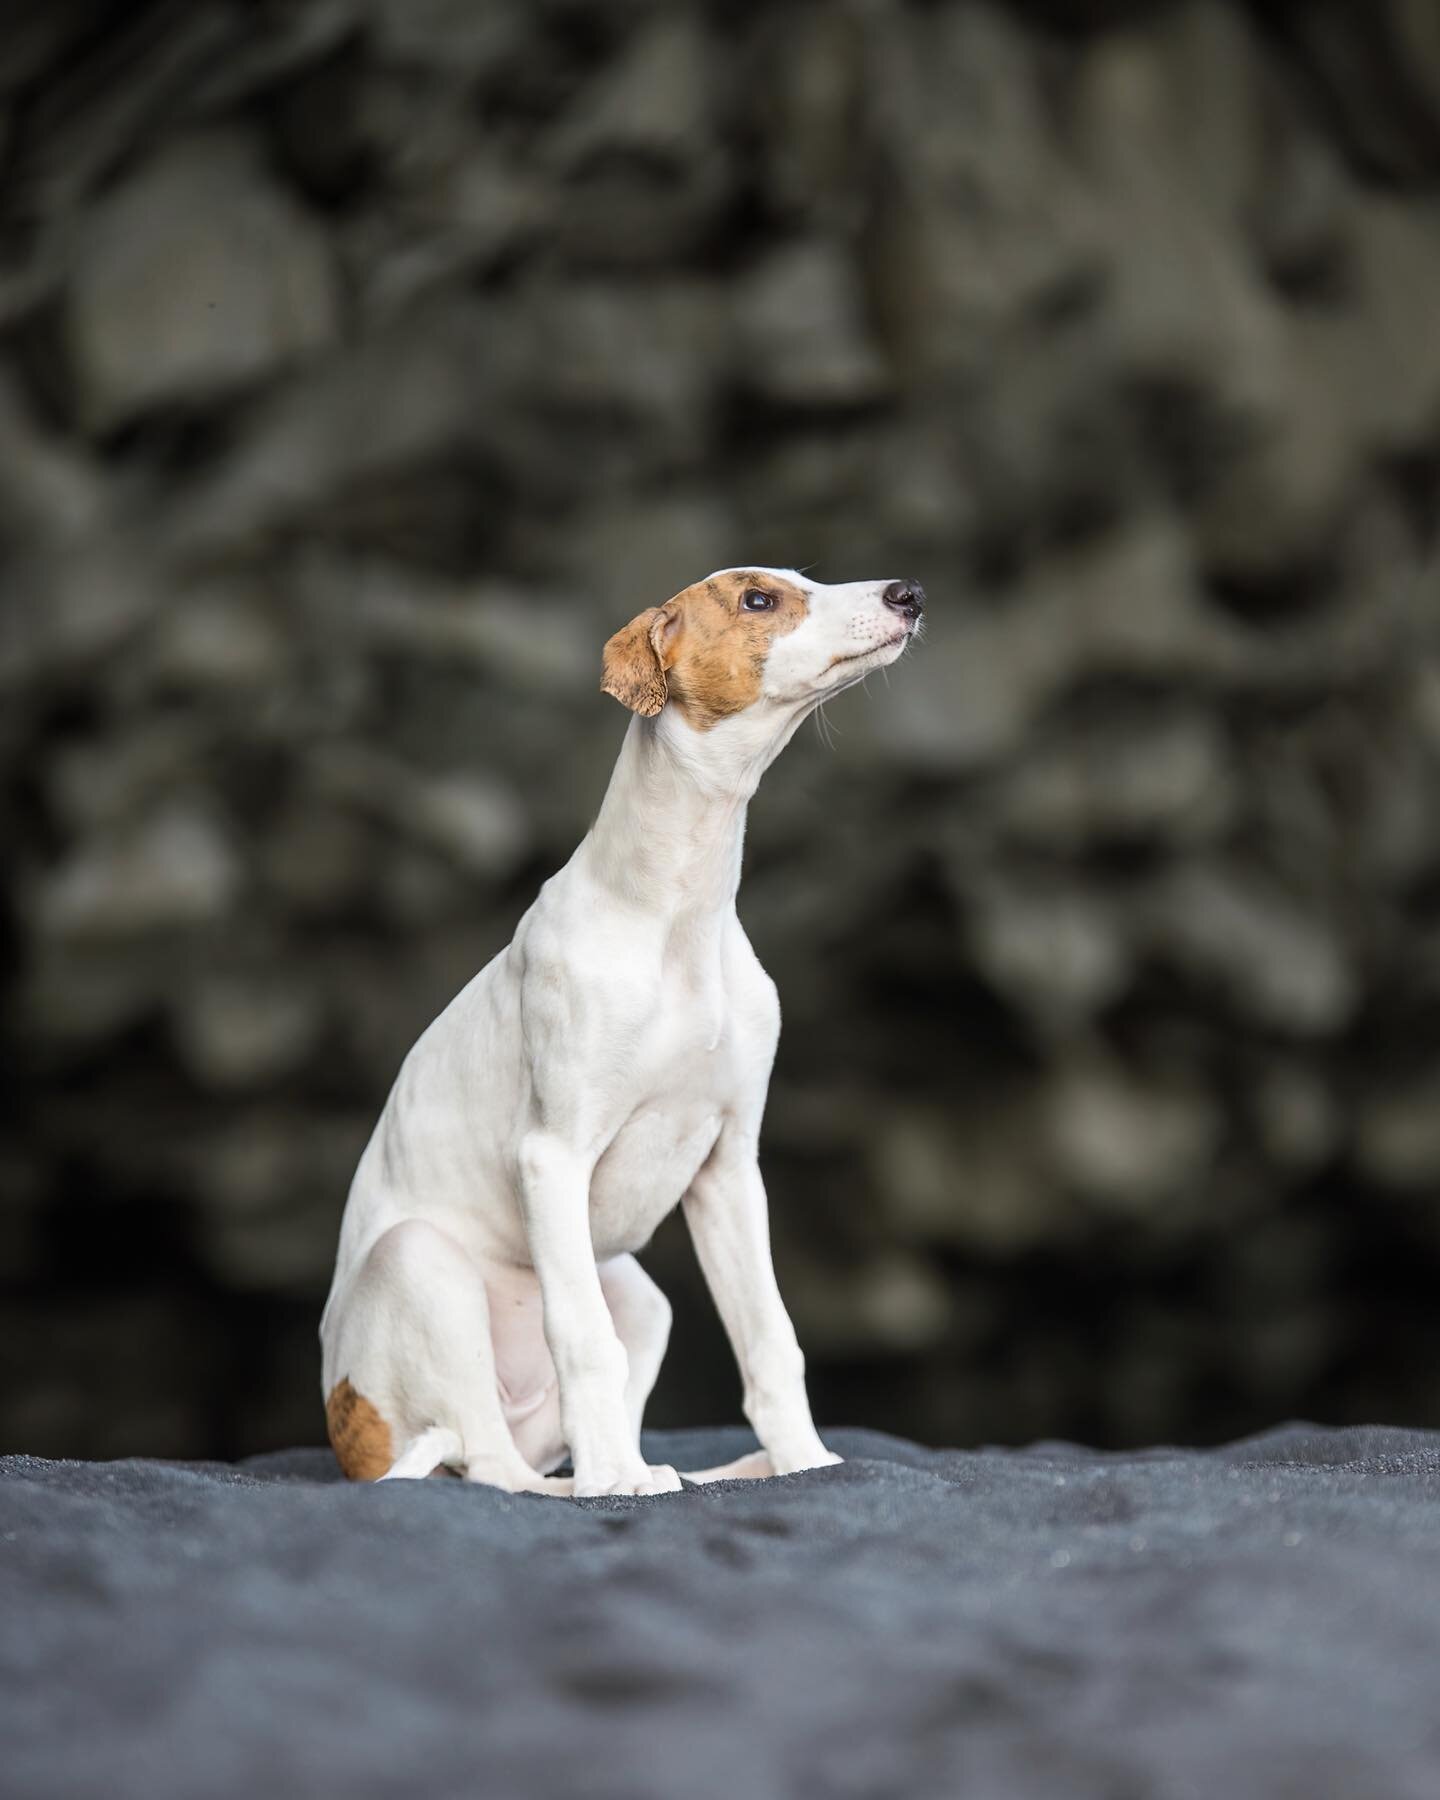 Efem&iacute;a at Reynisfjara 🖤 3 months old and growing bigger and more beautiful by the day 🥺

📸@mandybremse took

#greyhound #greyhoundlove #greyhoundlife #greyhoundpuppy #greyhoundcuteness #greyhoundpuppies #greyhoundsofinstagram #greyhound_fea